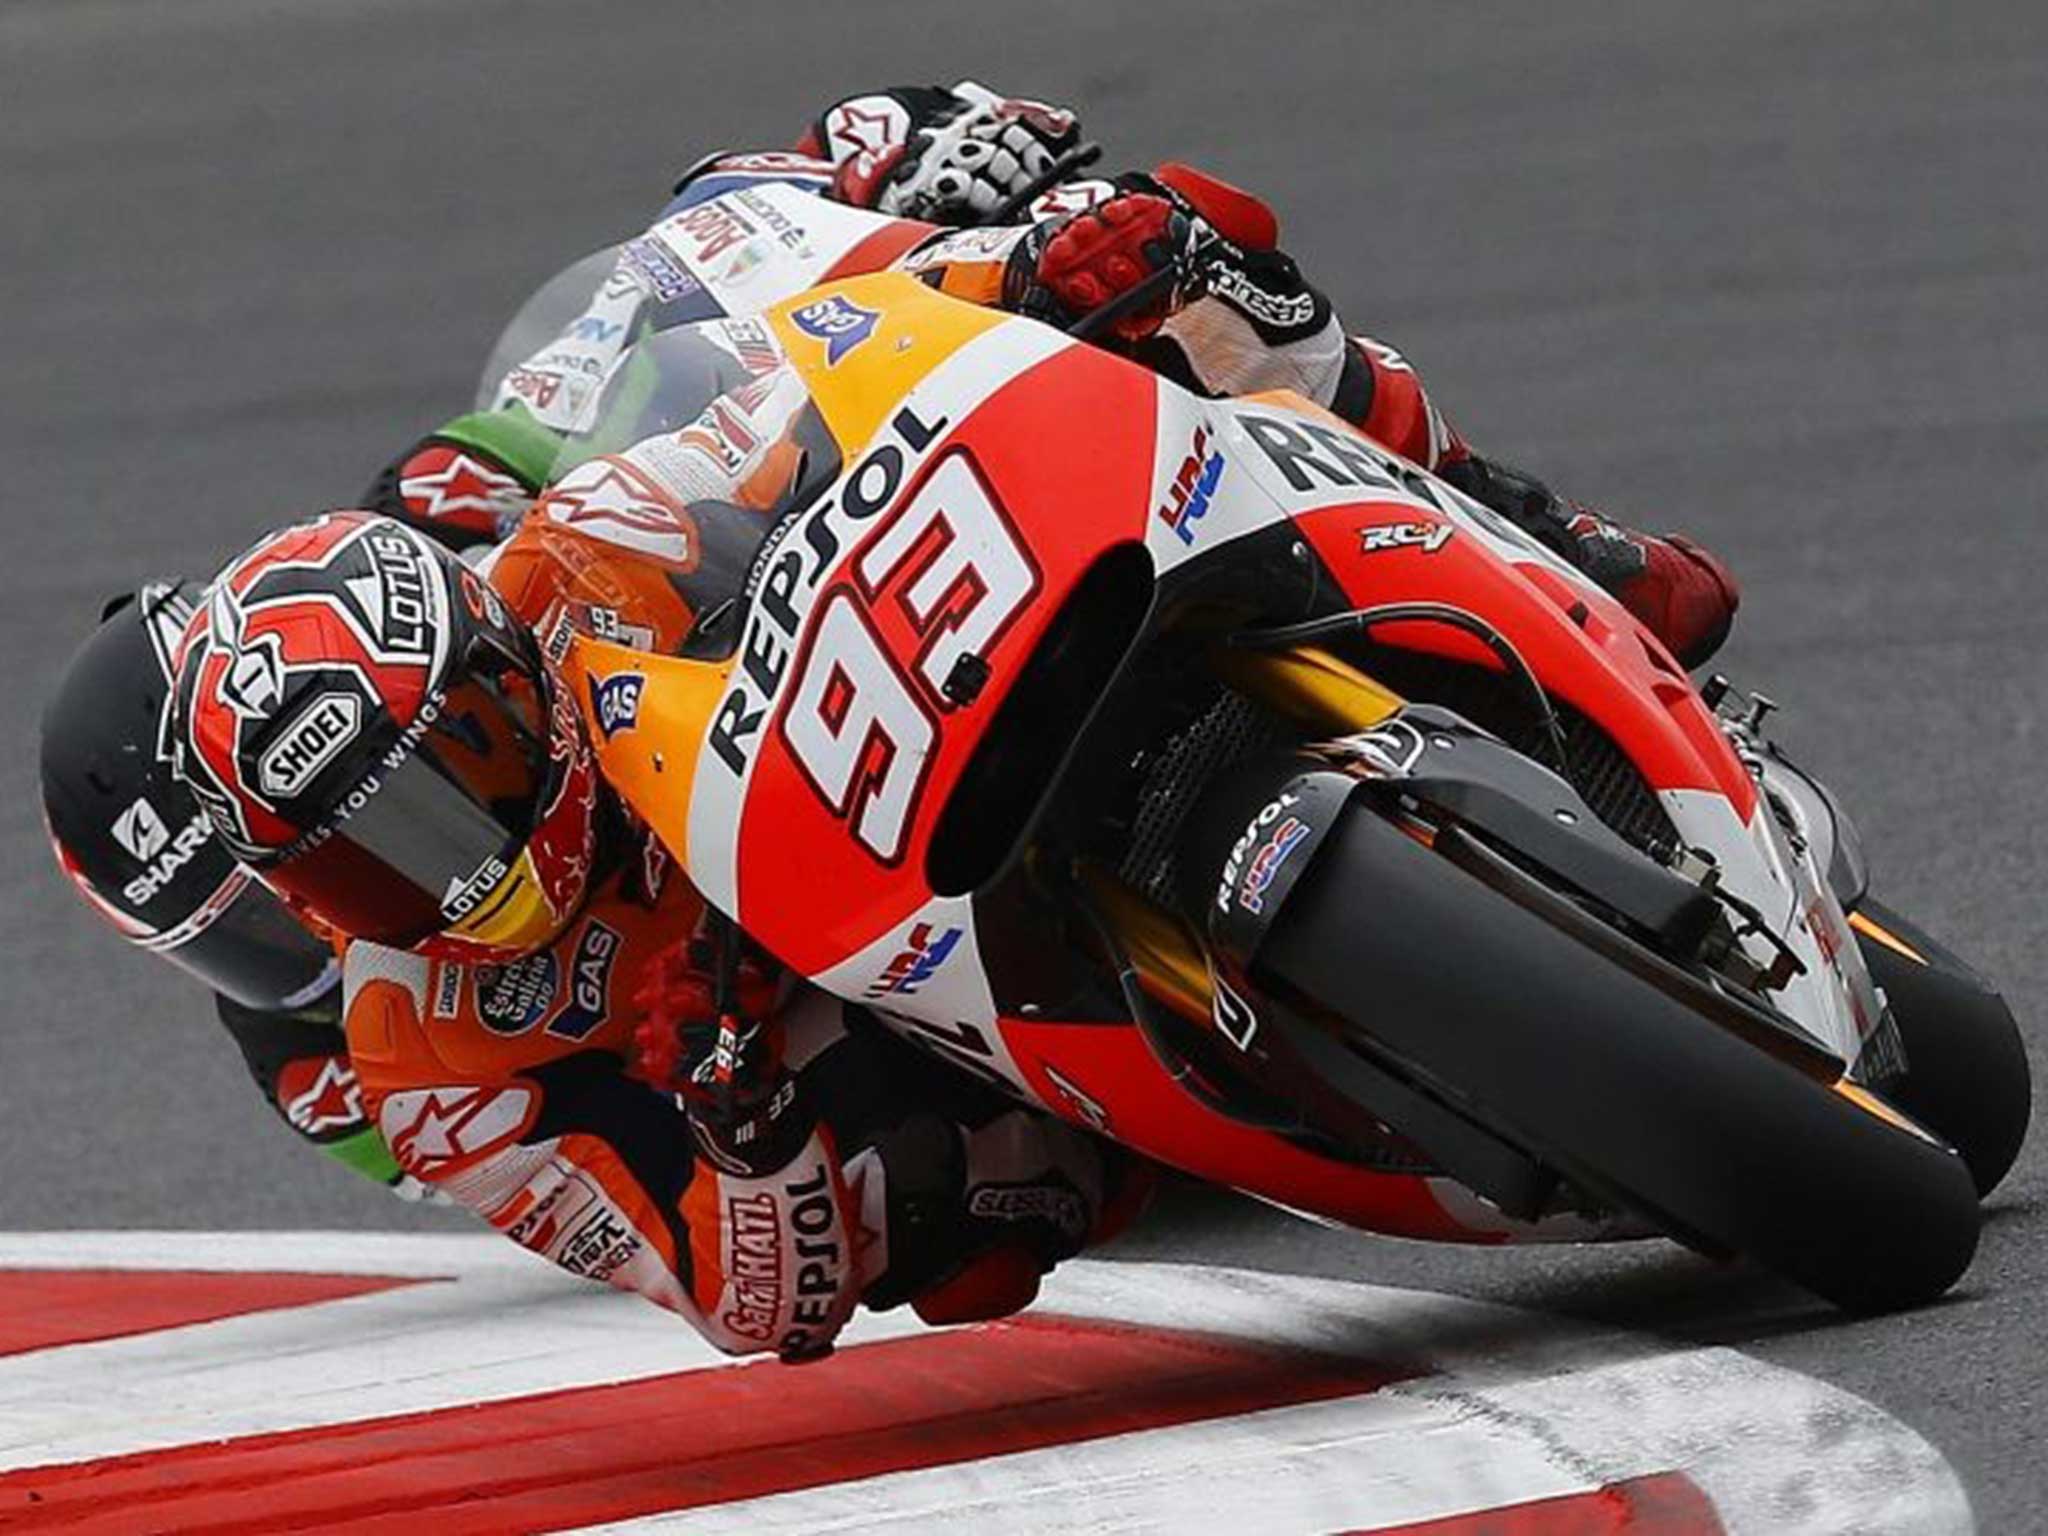 Lean time over: Marc Marquez leads Briton Scott Redding in qualifying at Silverstone after coming fourth last time